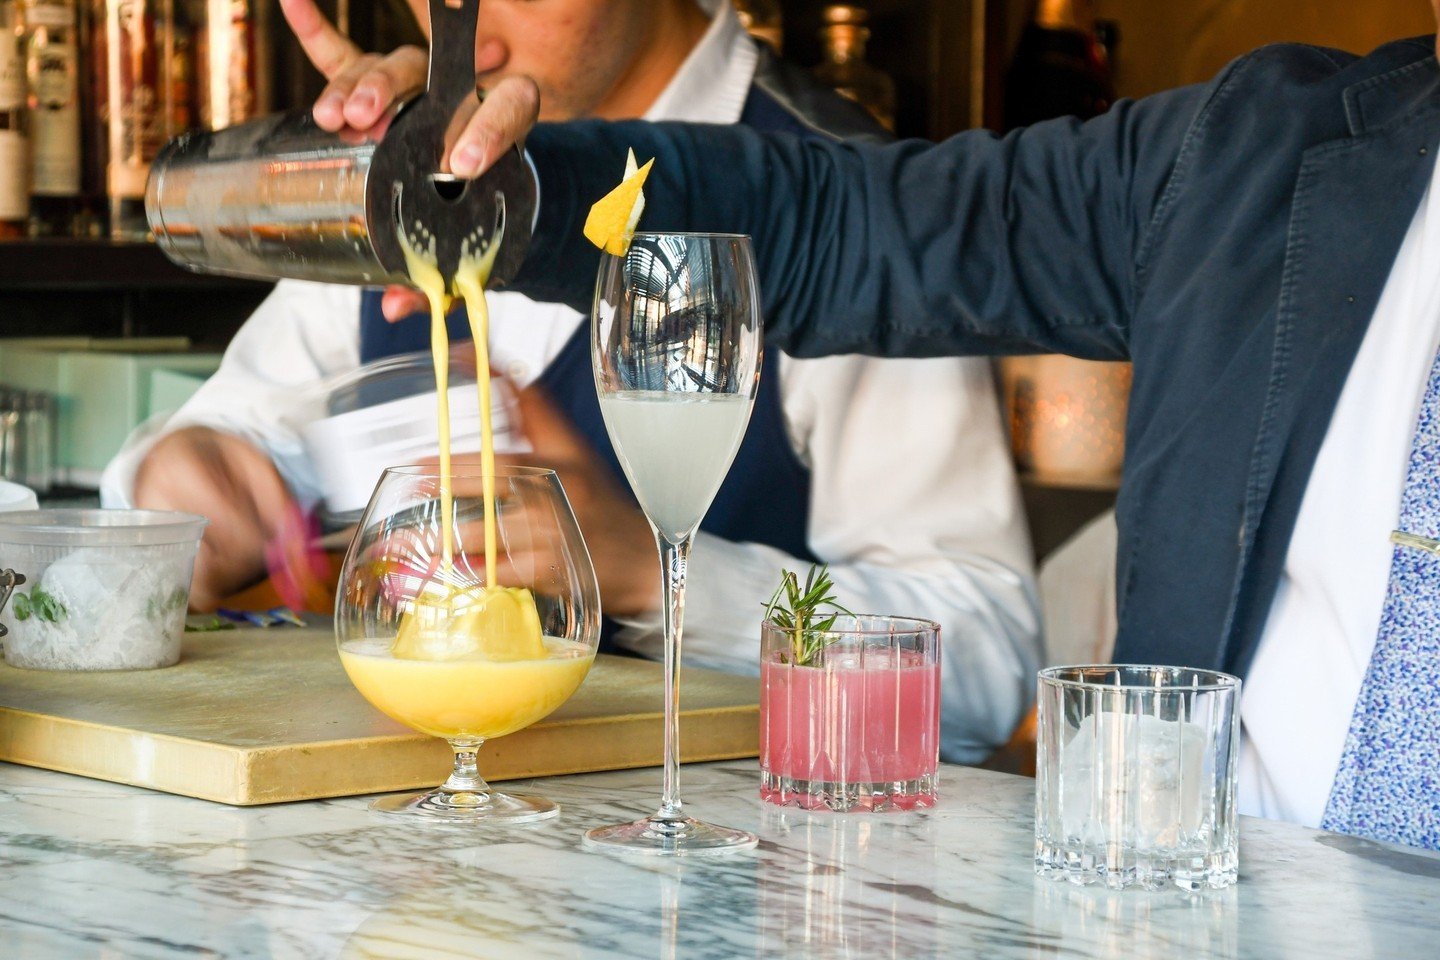 Our bar is always pouring up exciting new cocktails for you to enjoy with your #MasseriaMoments 🍸️ ⁠
⁠
Give our spring menu a try next time you're in the neighborhood - our bar is available for walk-ins!